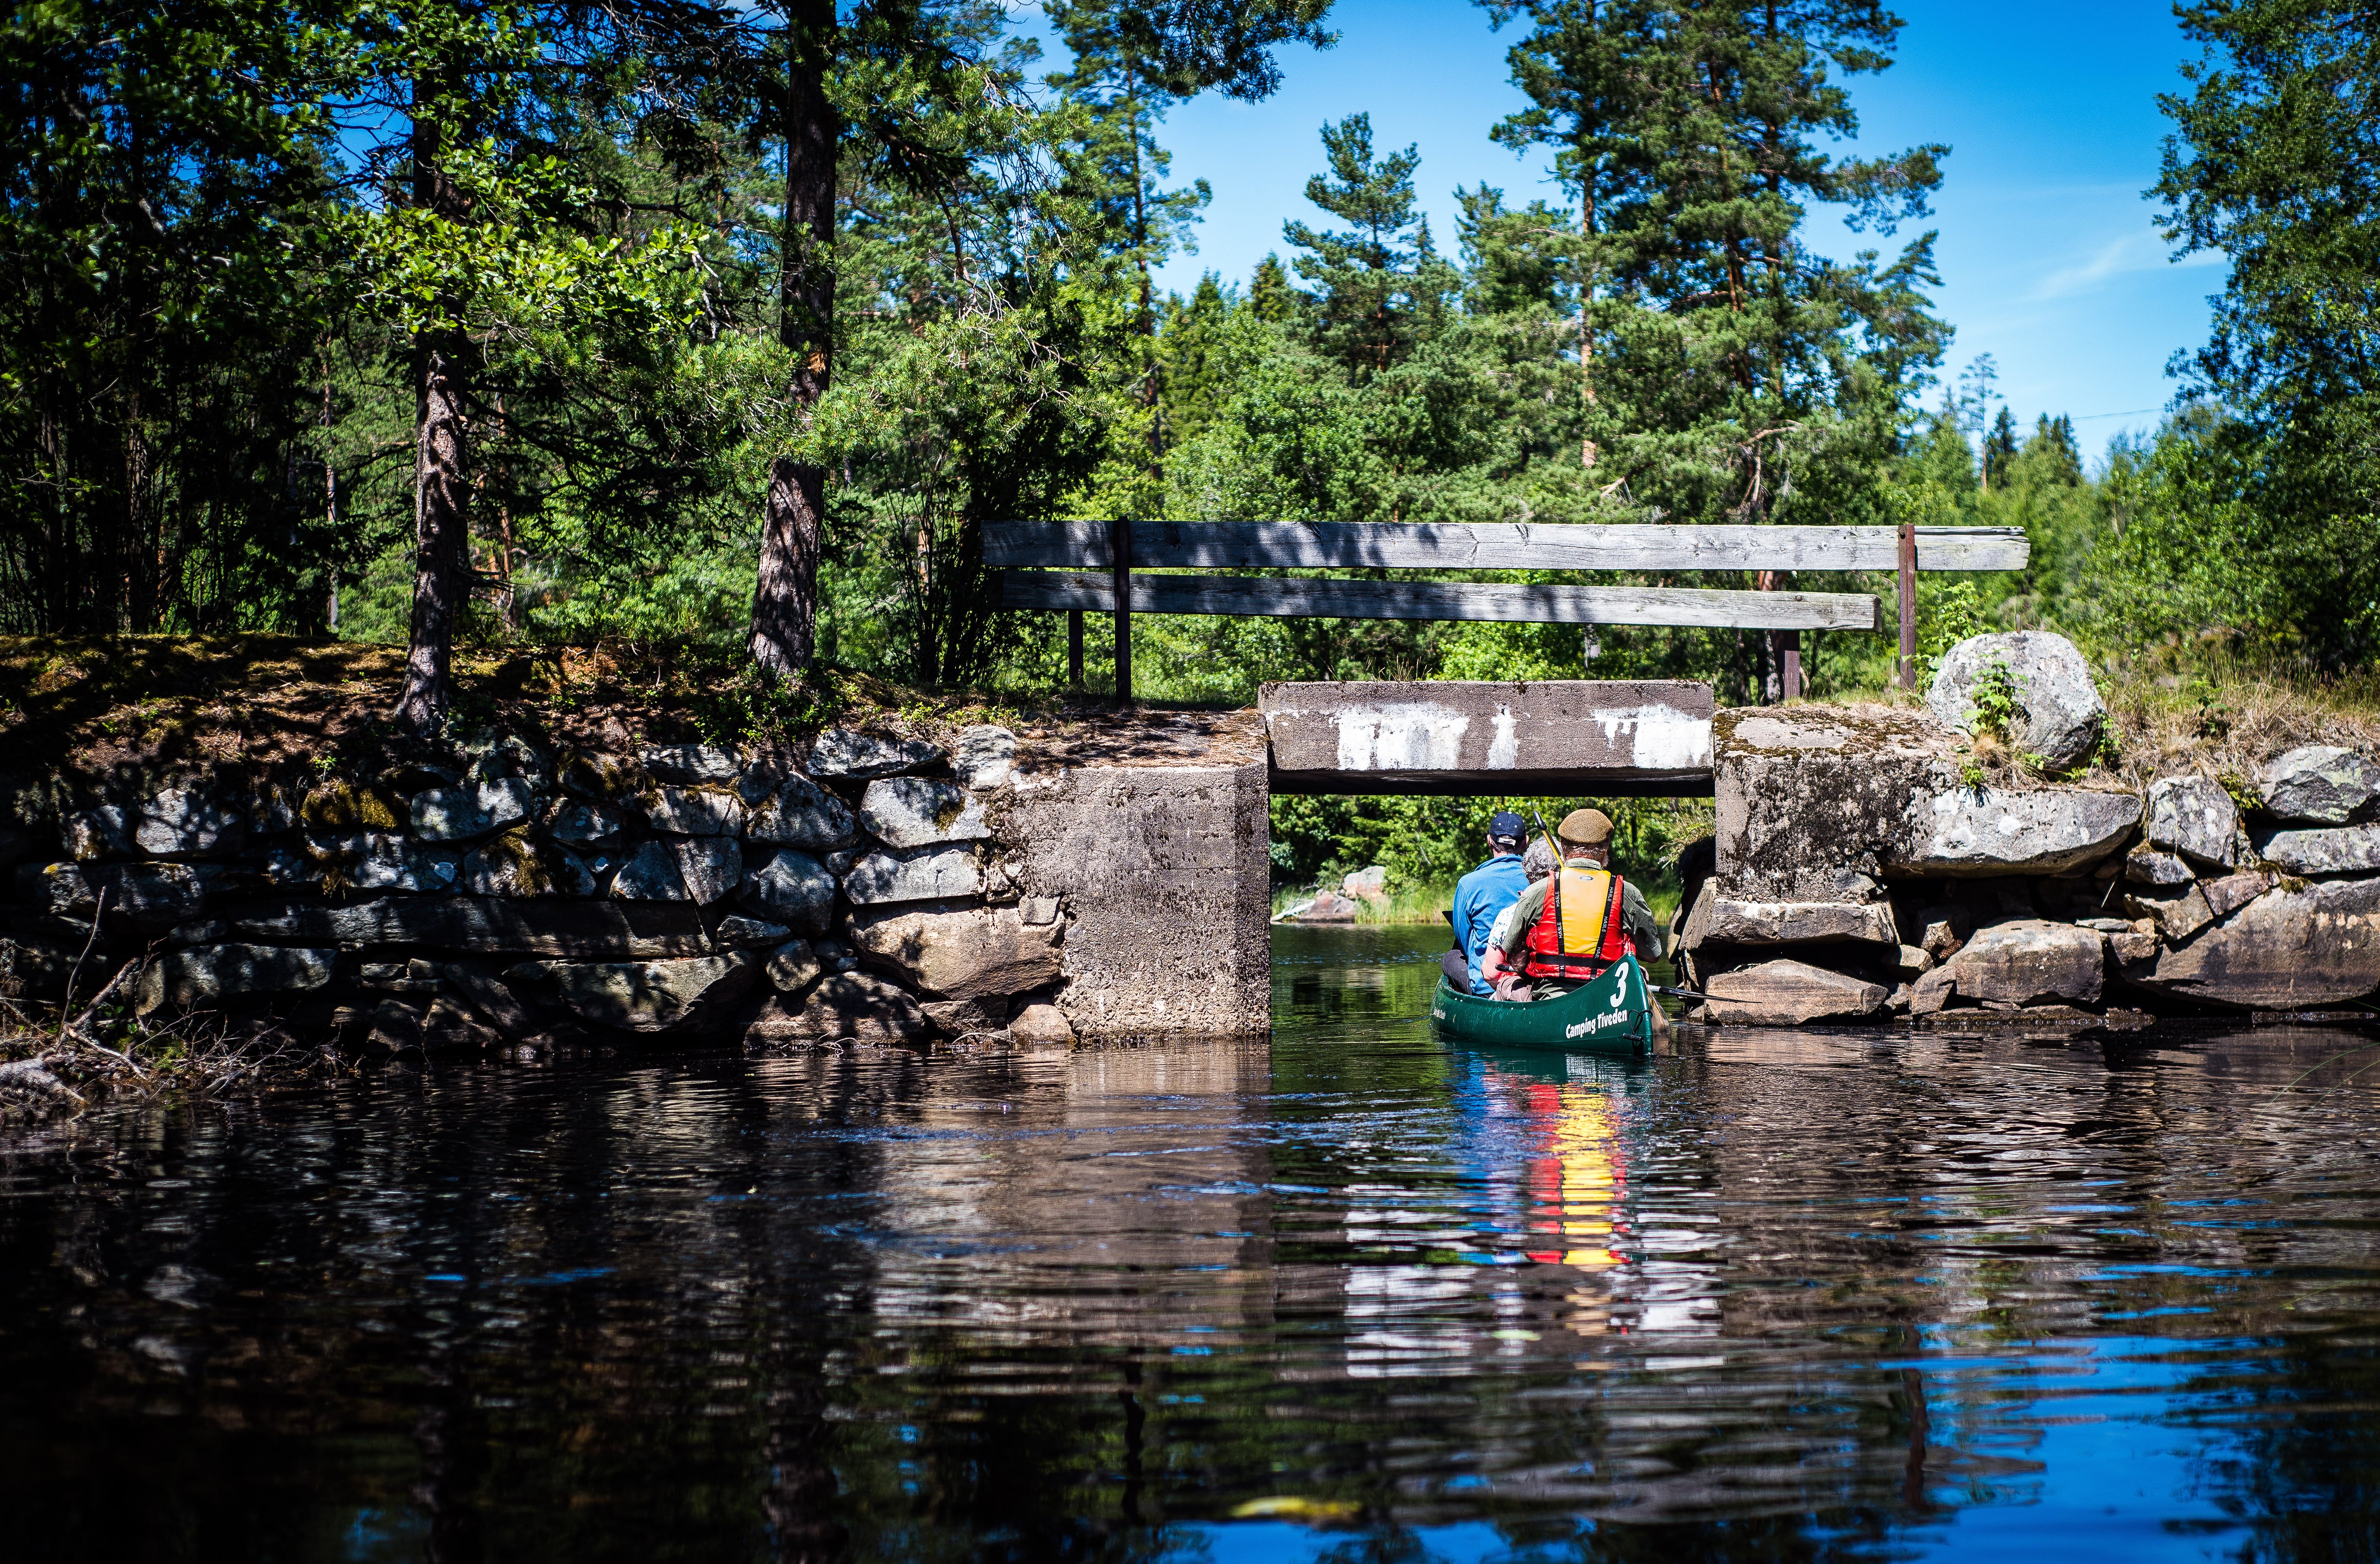 Discover Tiveden by historic land routes and waterways